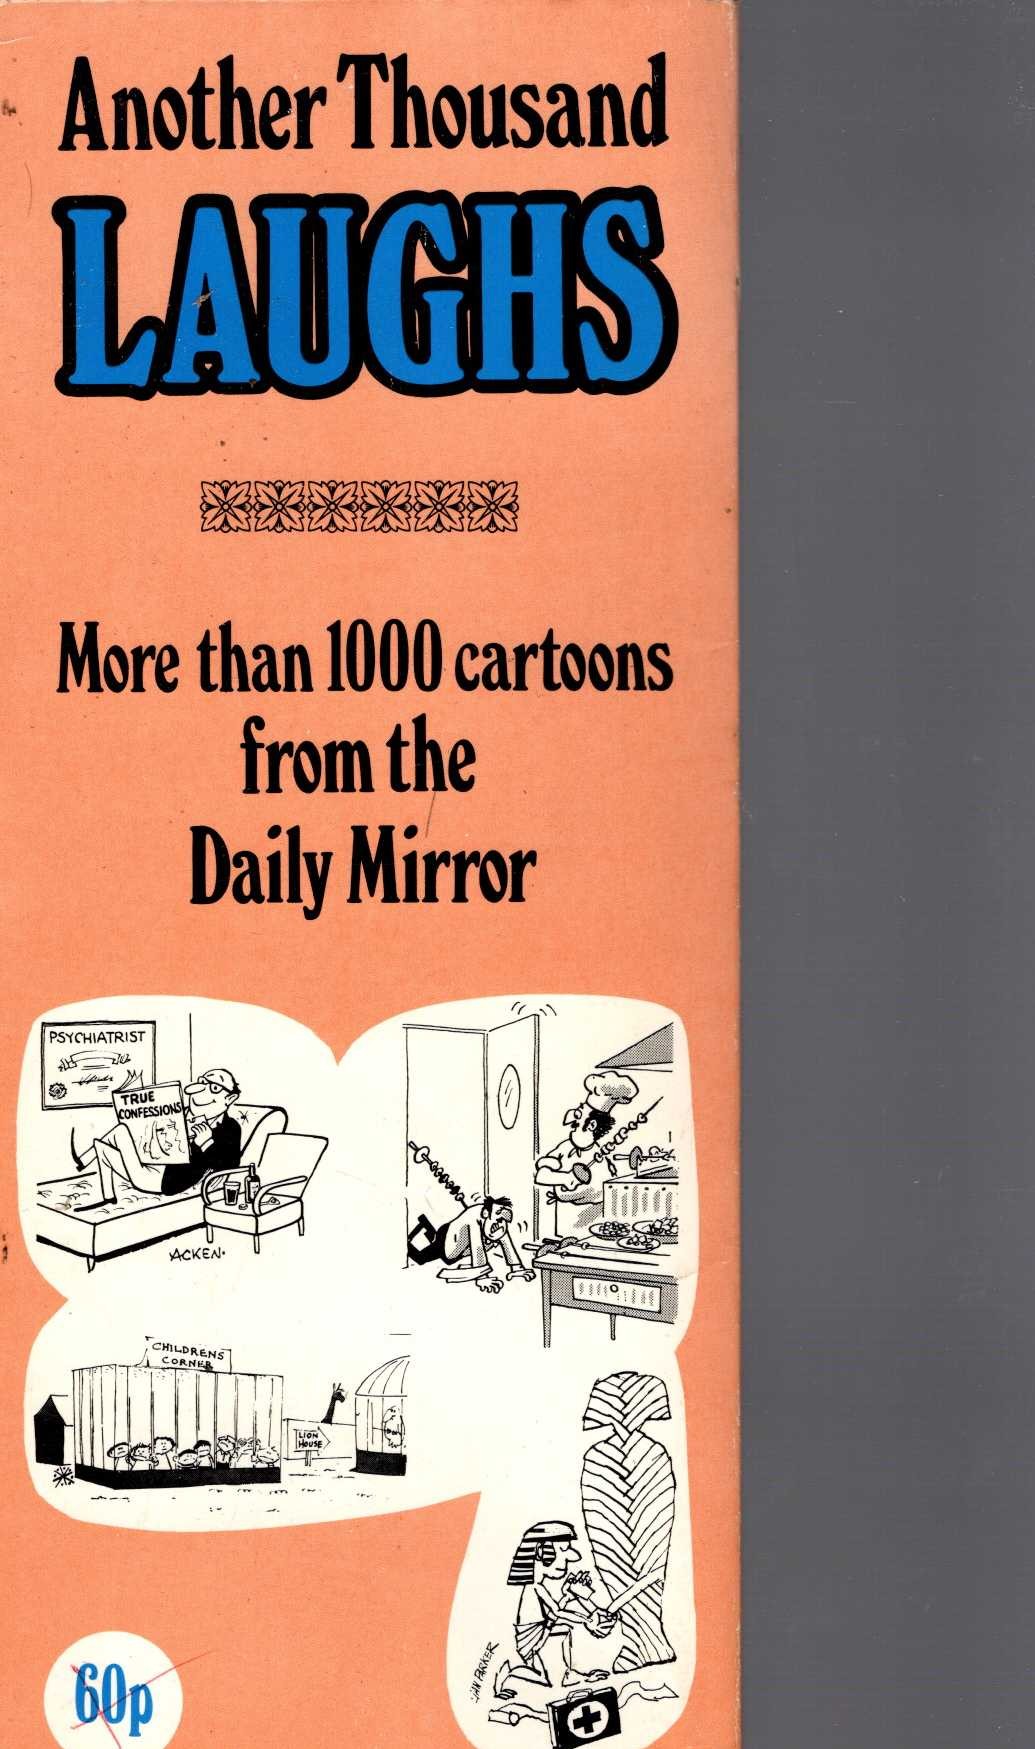 The Daily Mirror  ANOTHER THOUSAND LAUGHS magnified rear book cover image